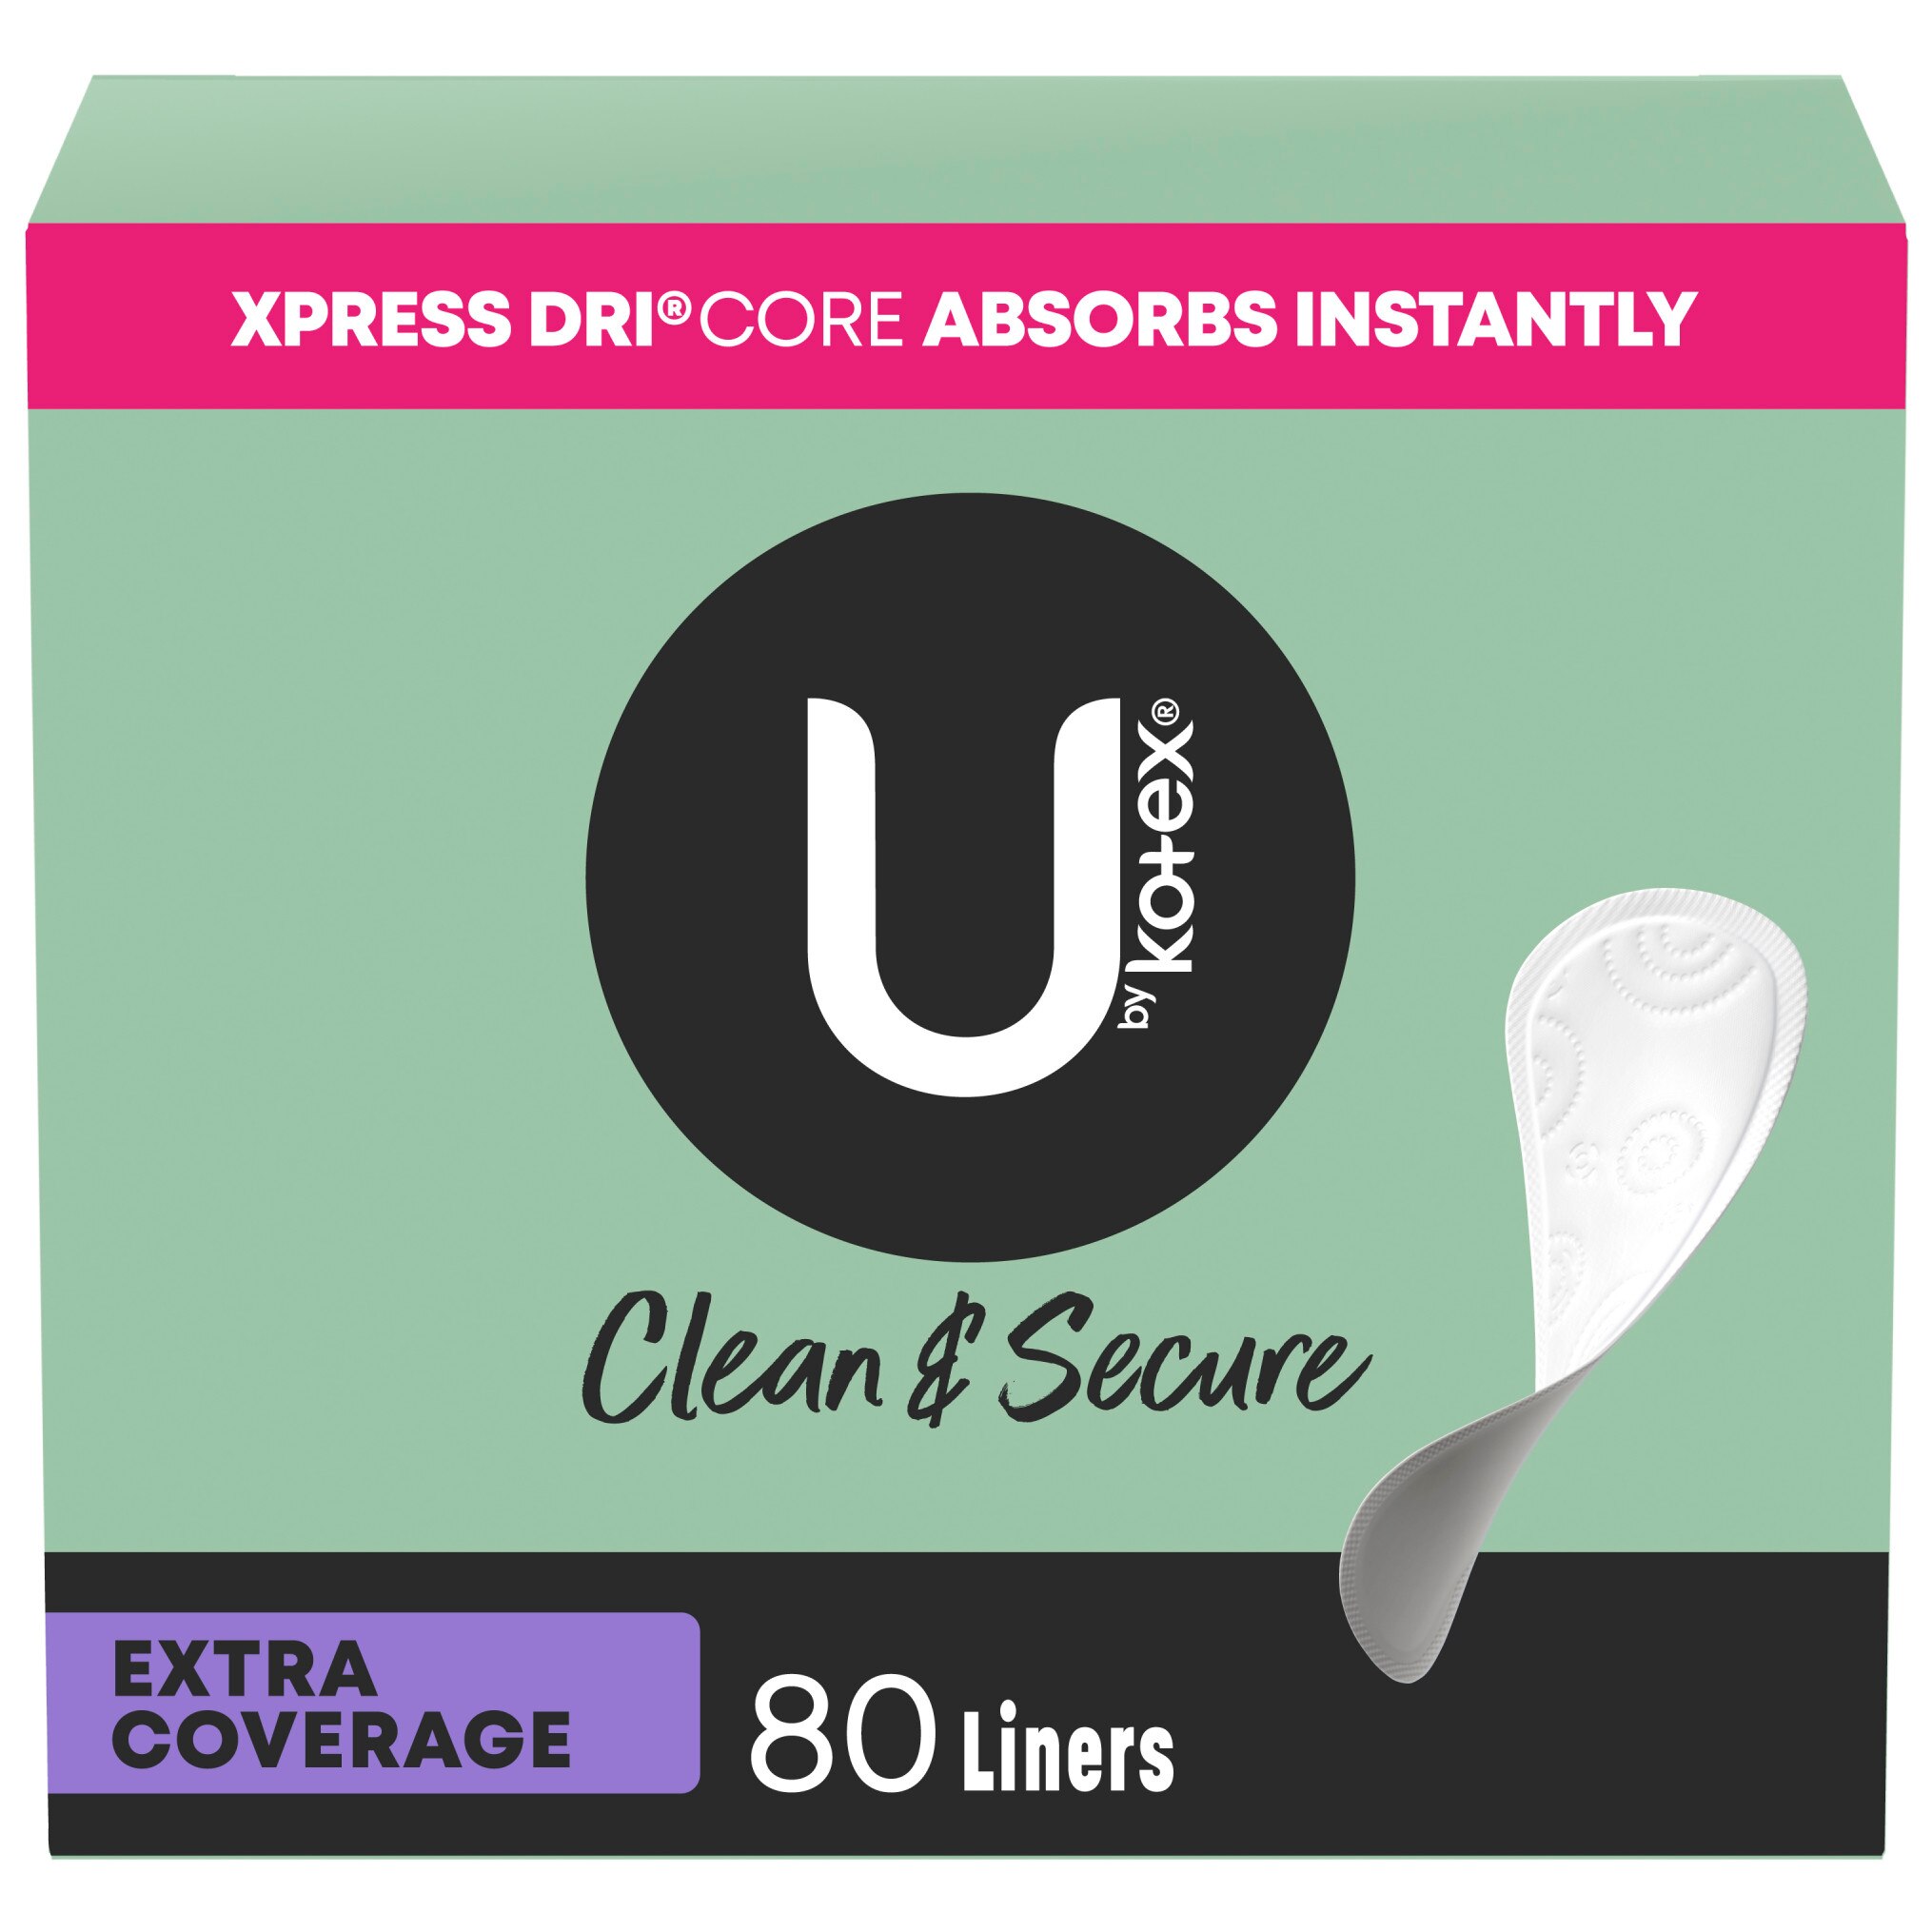 U by Kotex Lightdays Liners, Extra Coverage, Fragrance-Free, 80 Count